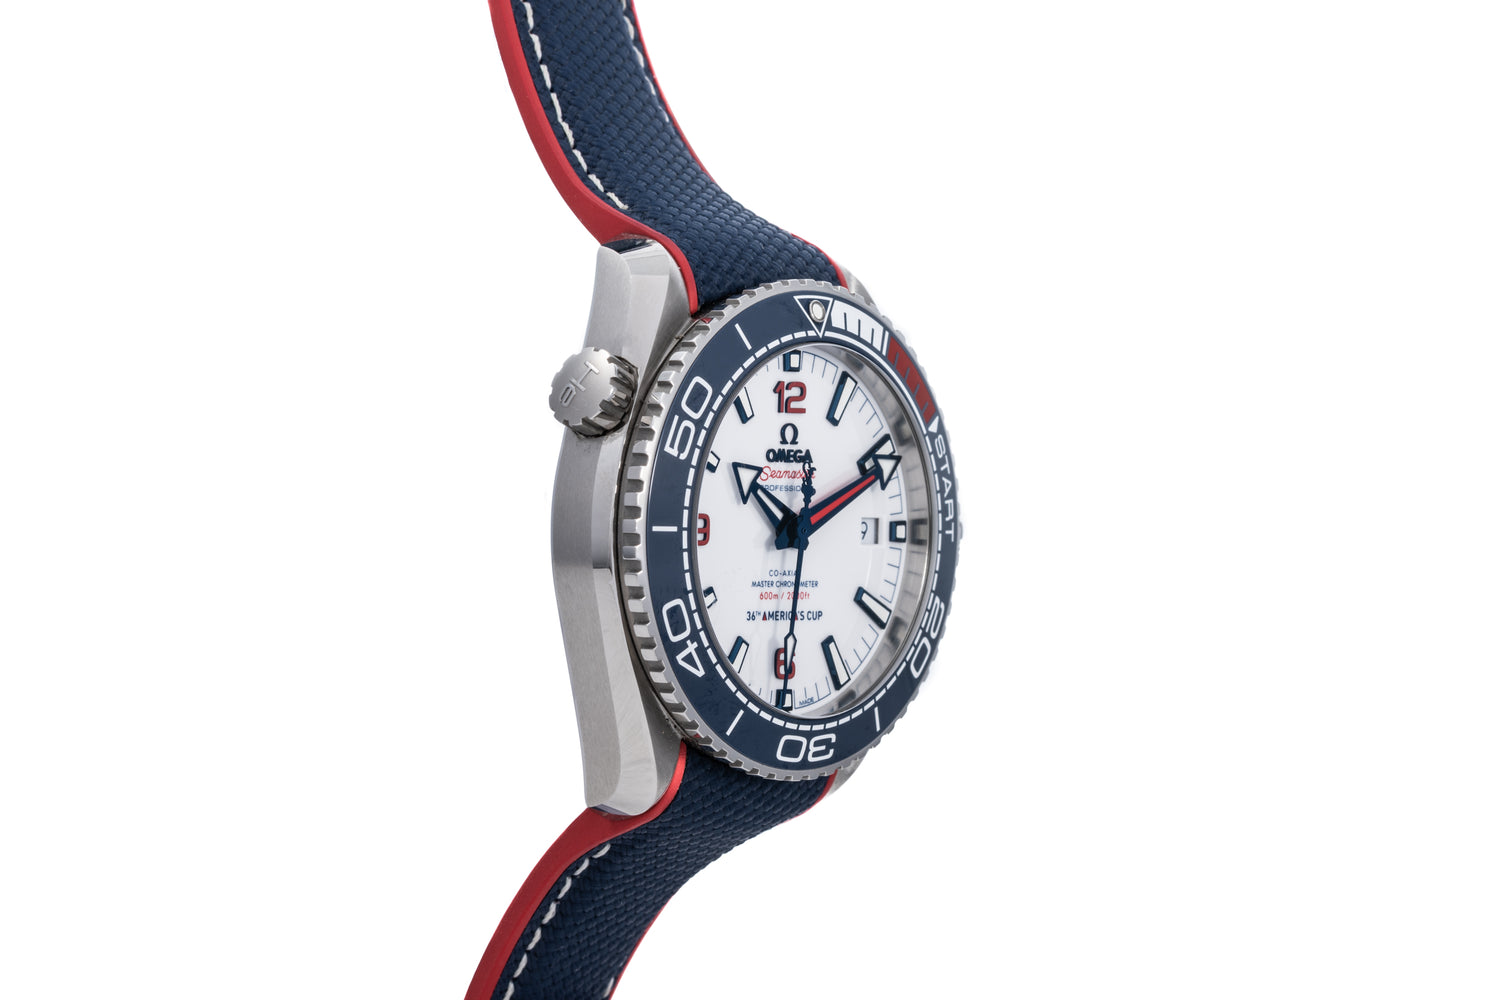 americas cup watch